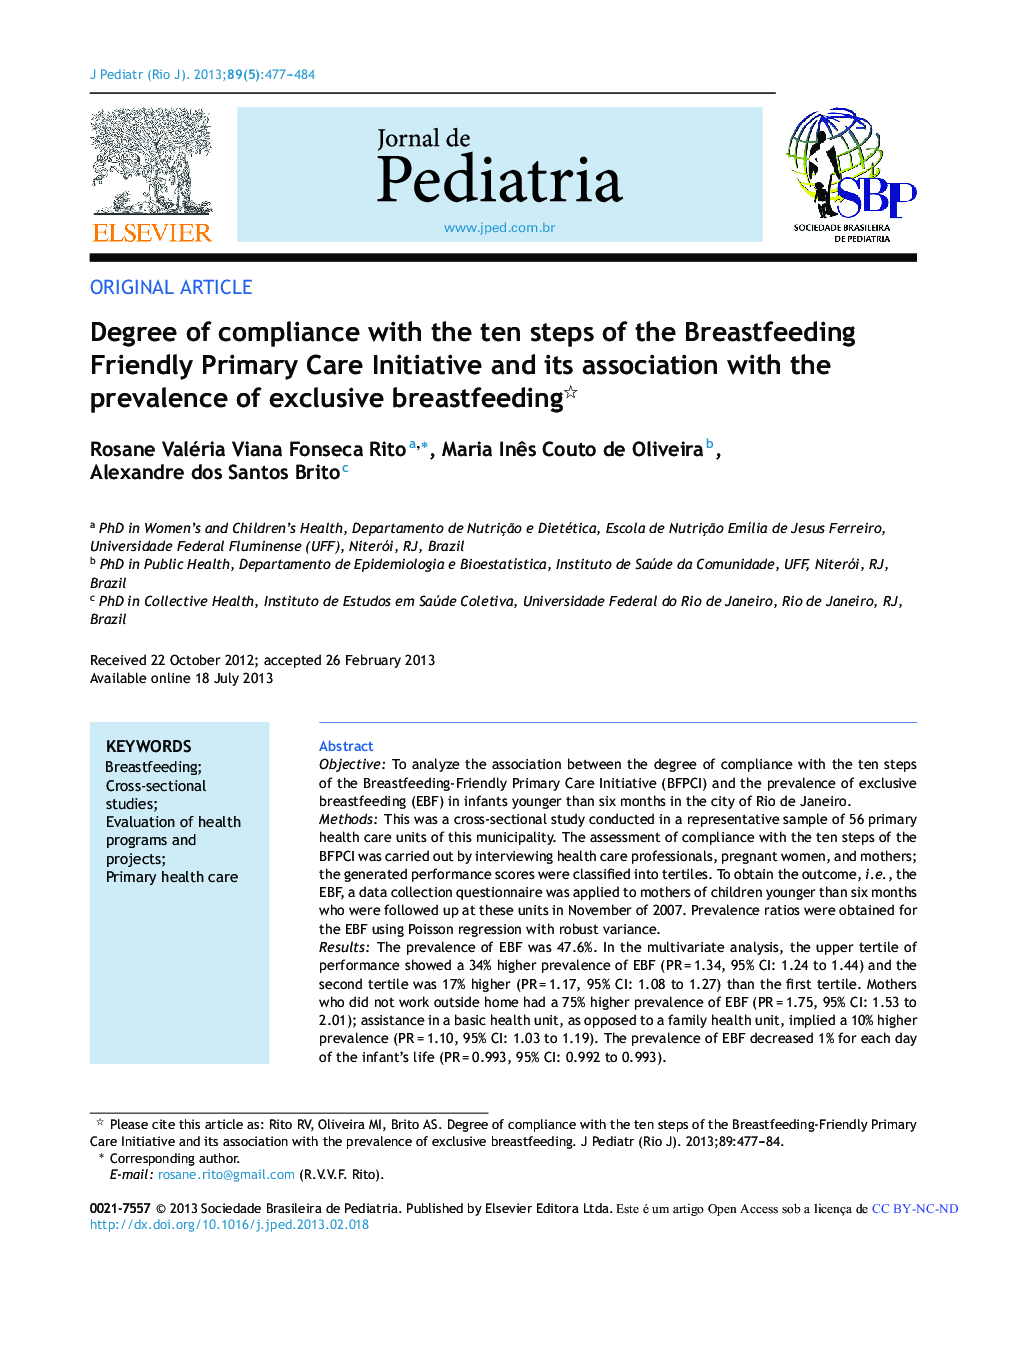 Degree of compliance with the ten steps of the Breastfeeding Friendly Primary Care Initiative and its association with the prevalence of exclusive breastfeeding 